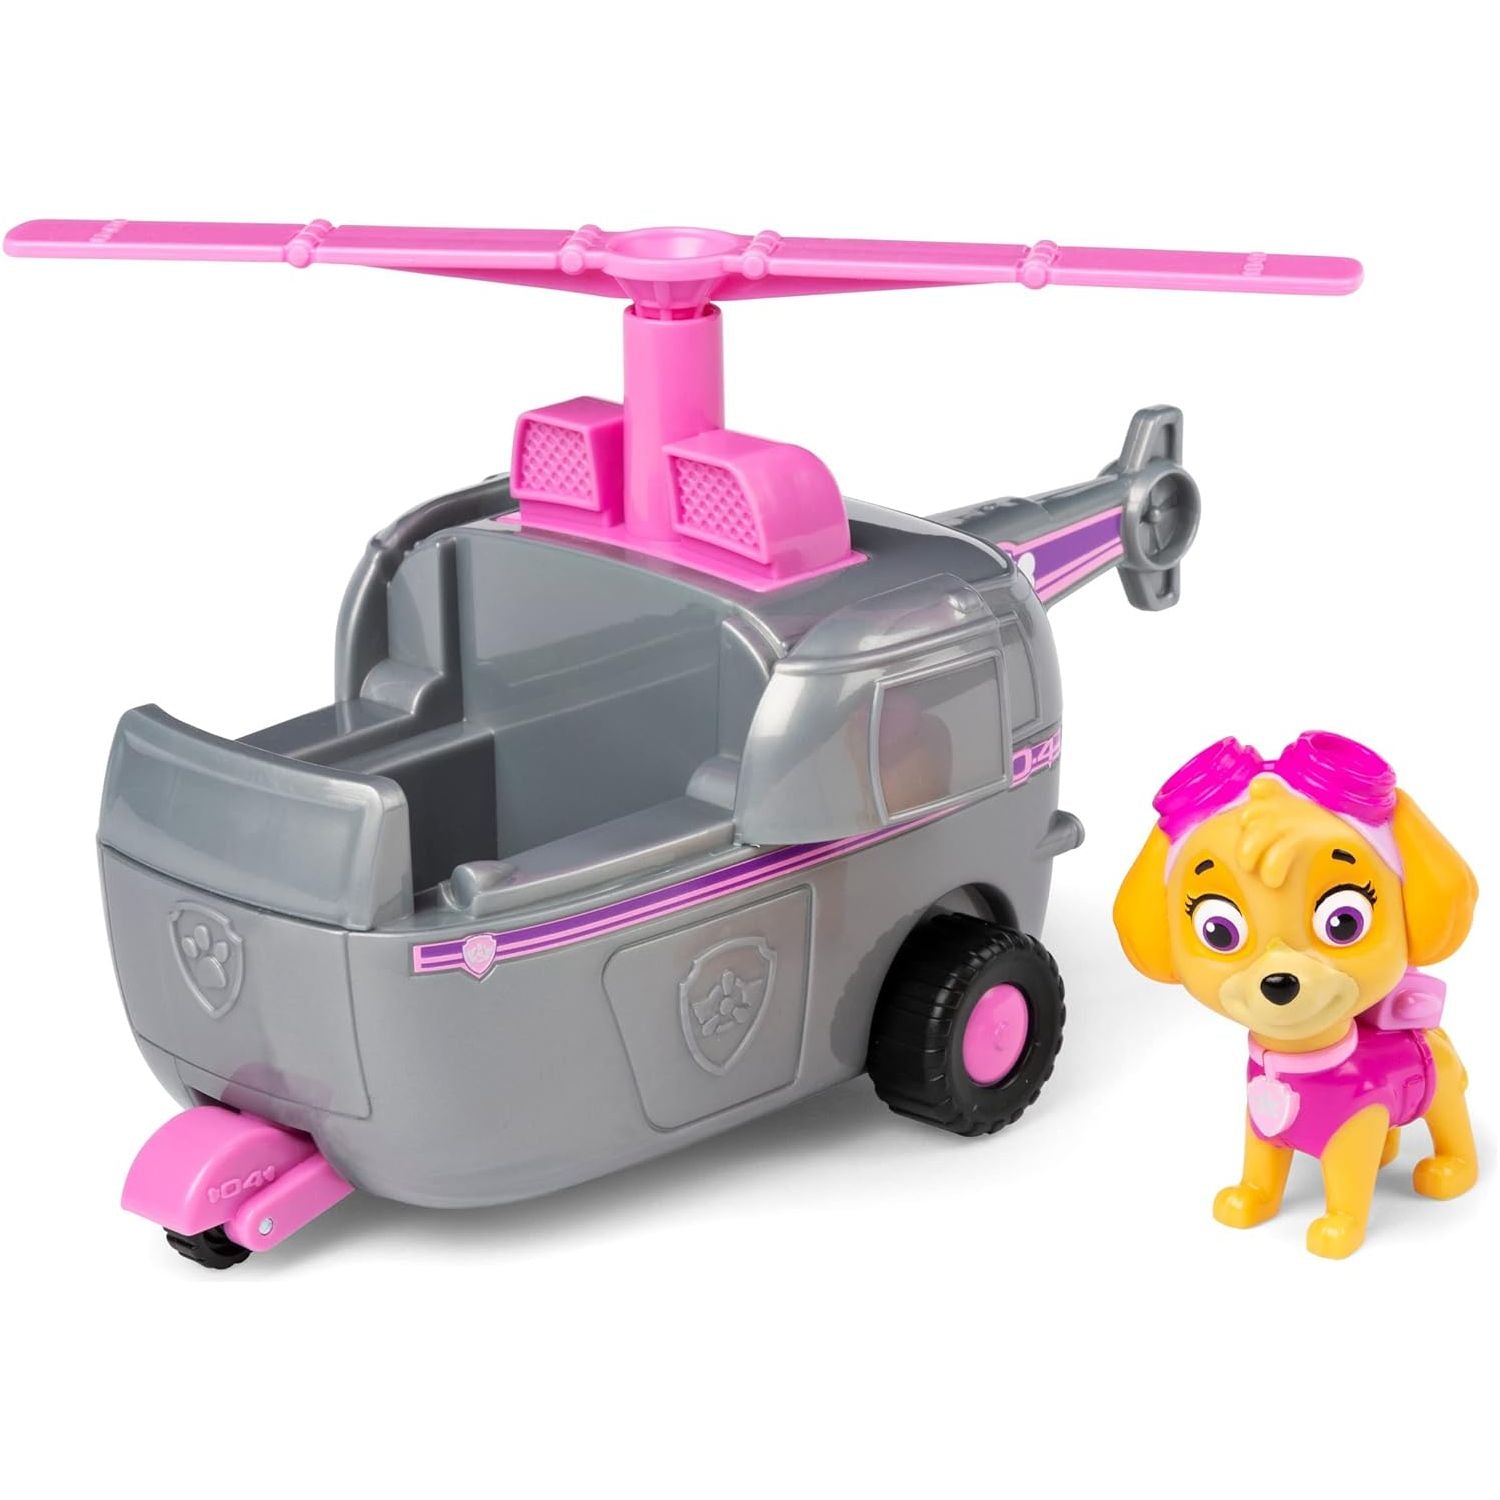 Paw Patrol, Skye’s Helicopter Vehicle with Collectible Figure